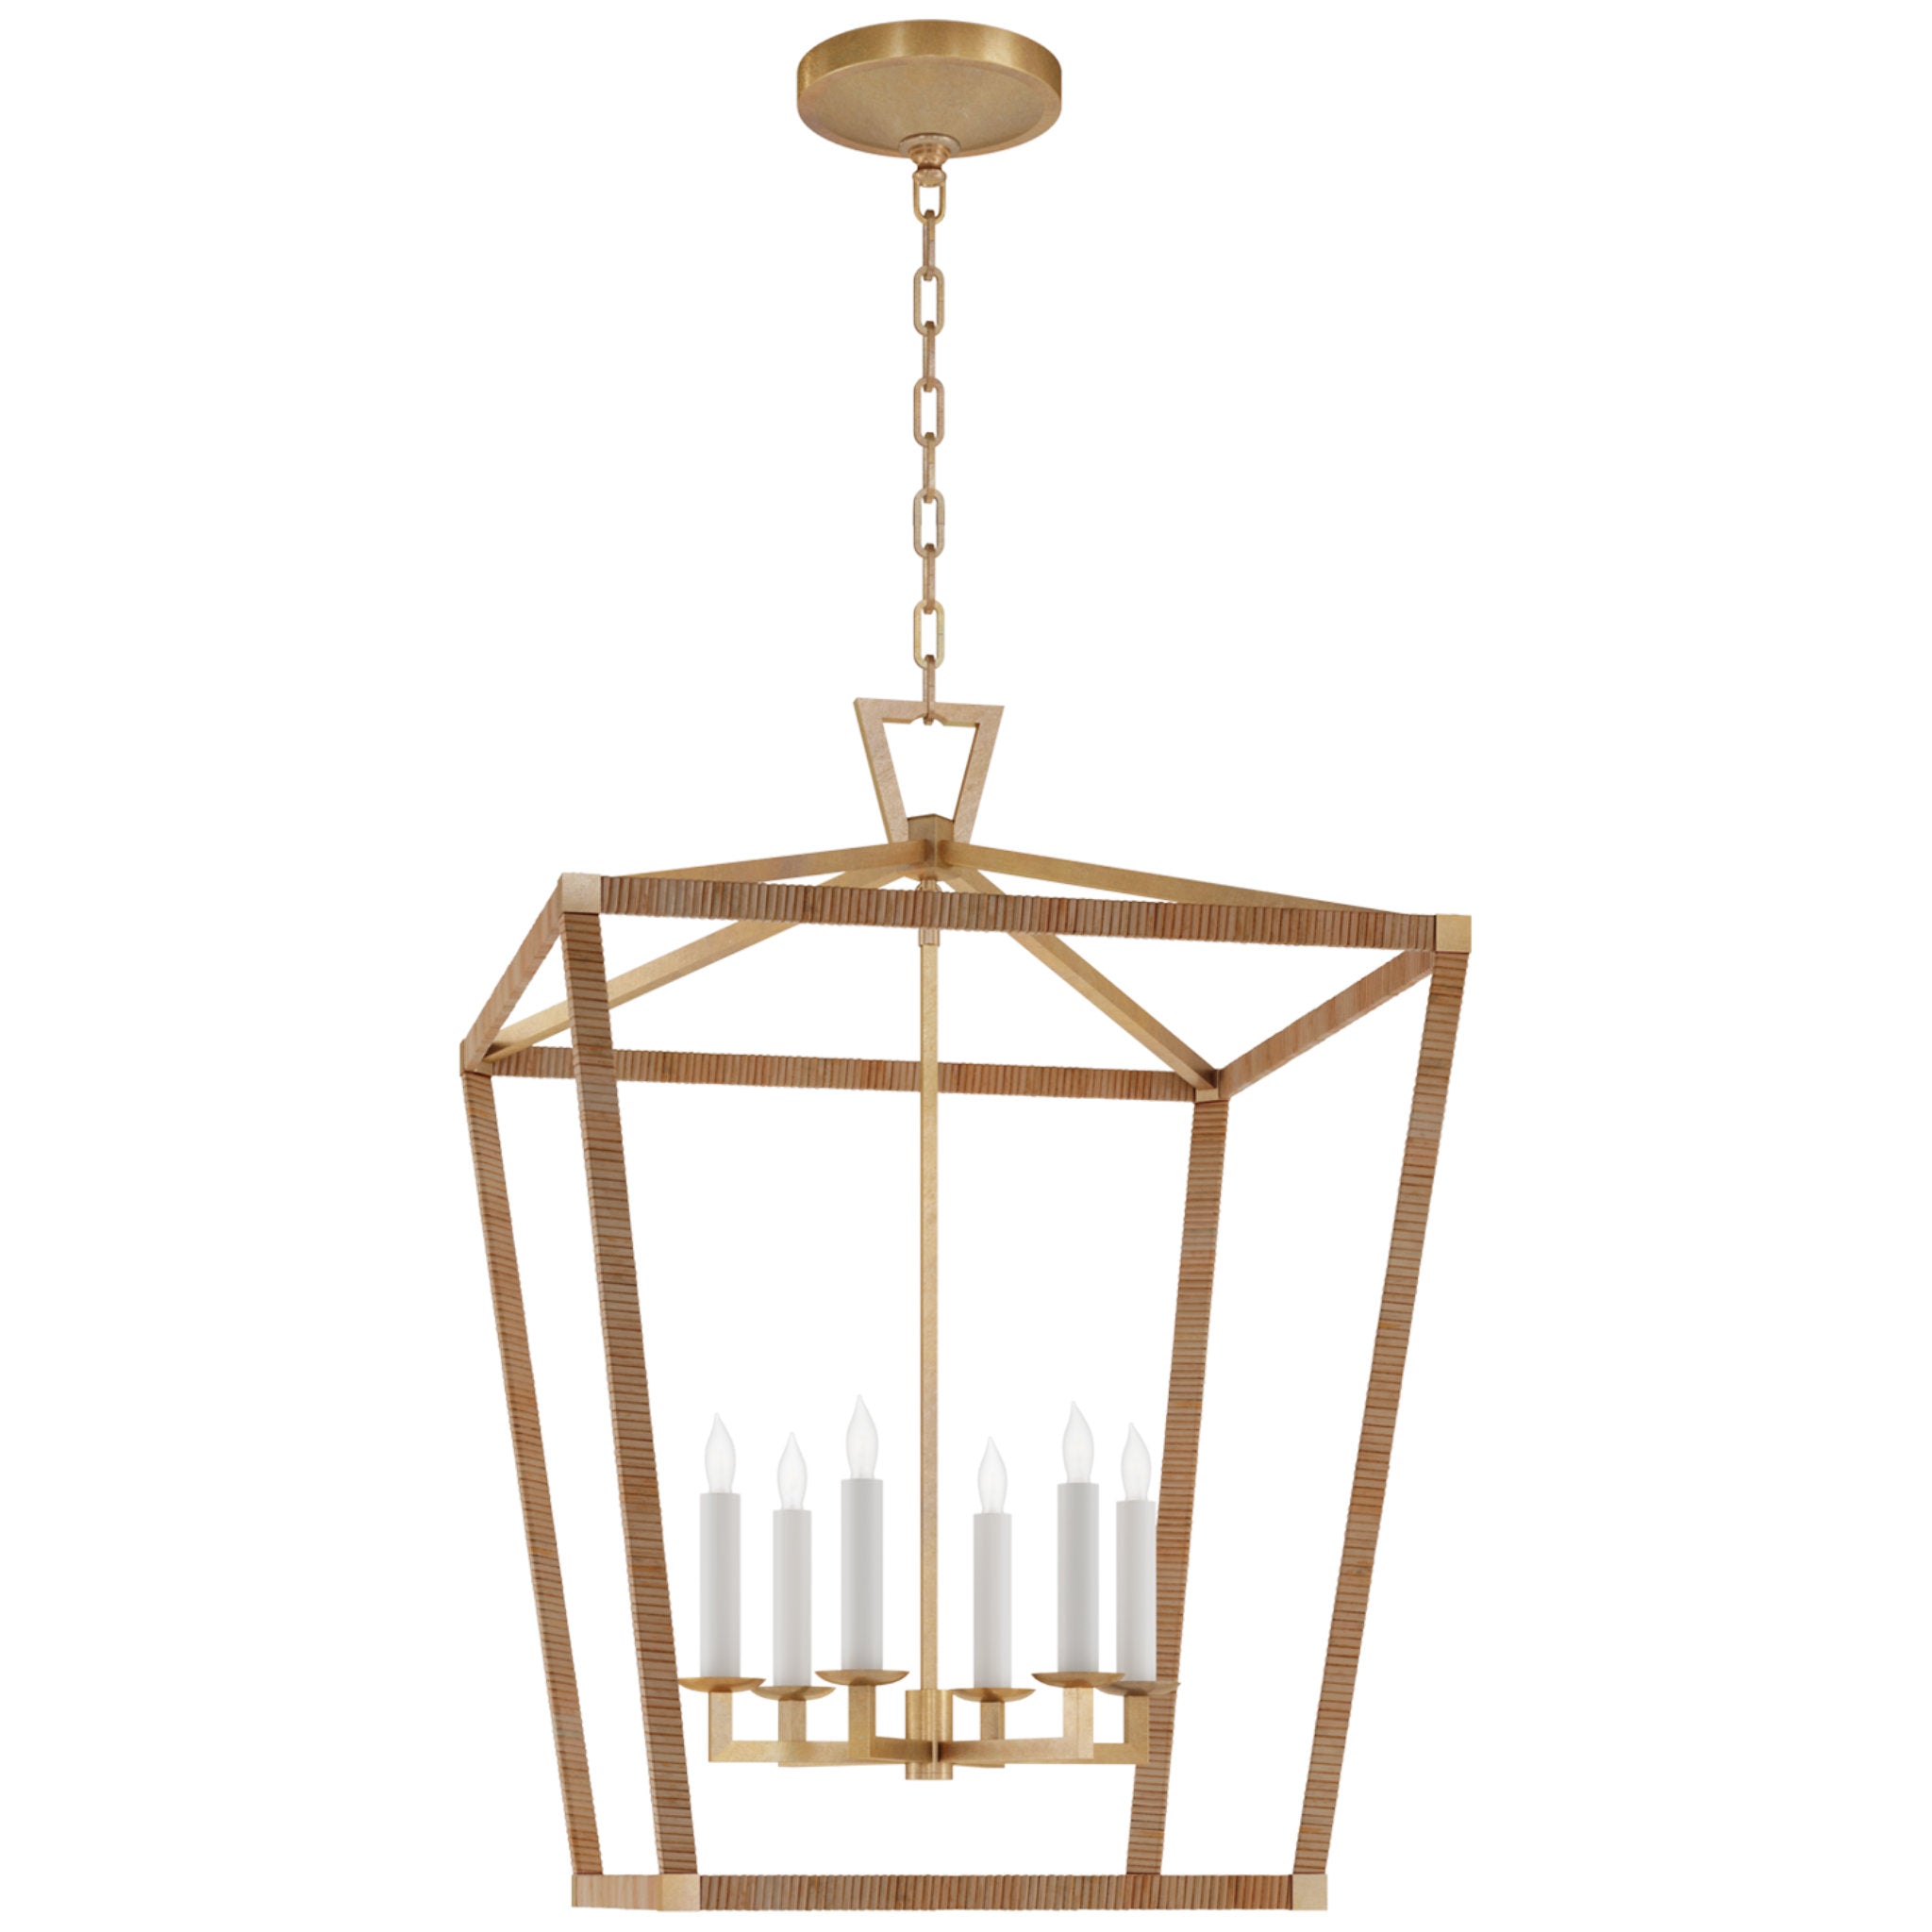 Chapman & Myers Darlana Large Wrapped Lantern in Antique-Burnished Brass and Natural Rattan